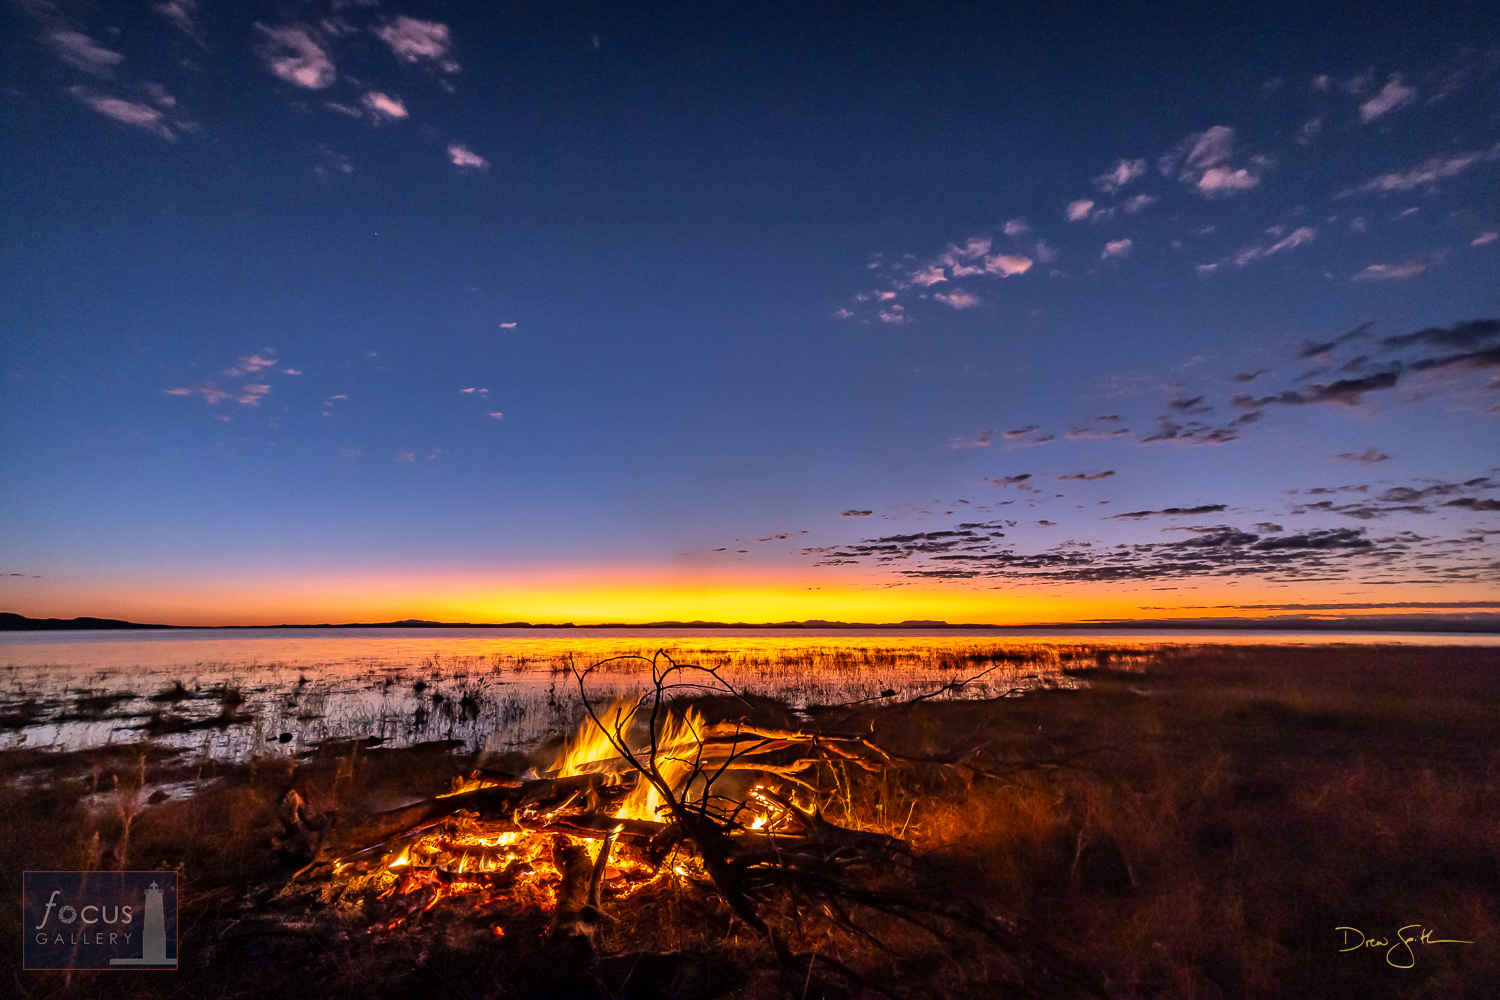 A bonfire burns on the shores of Lake Kariba at sunset as the last light of day glows in the sky.